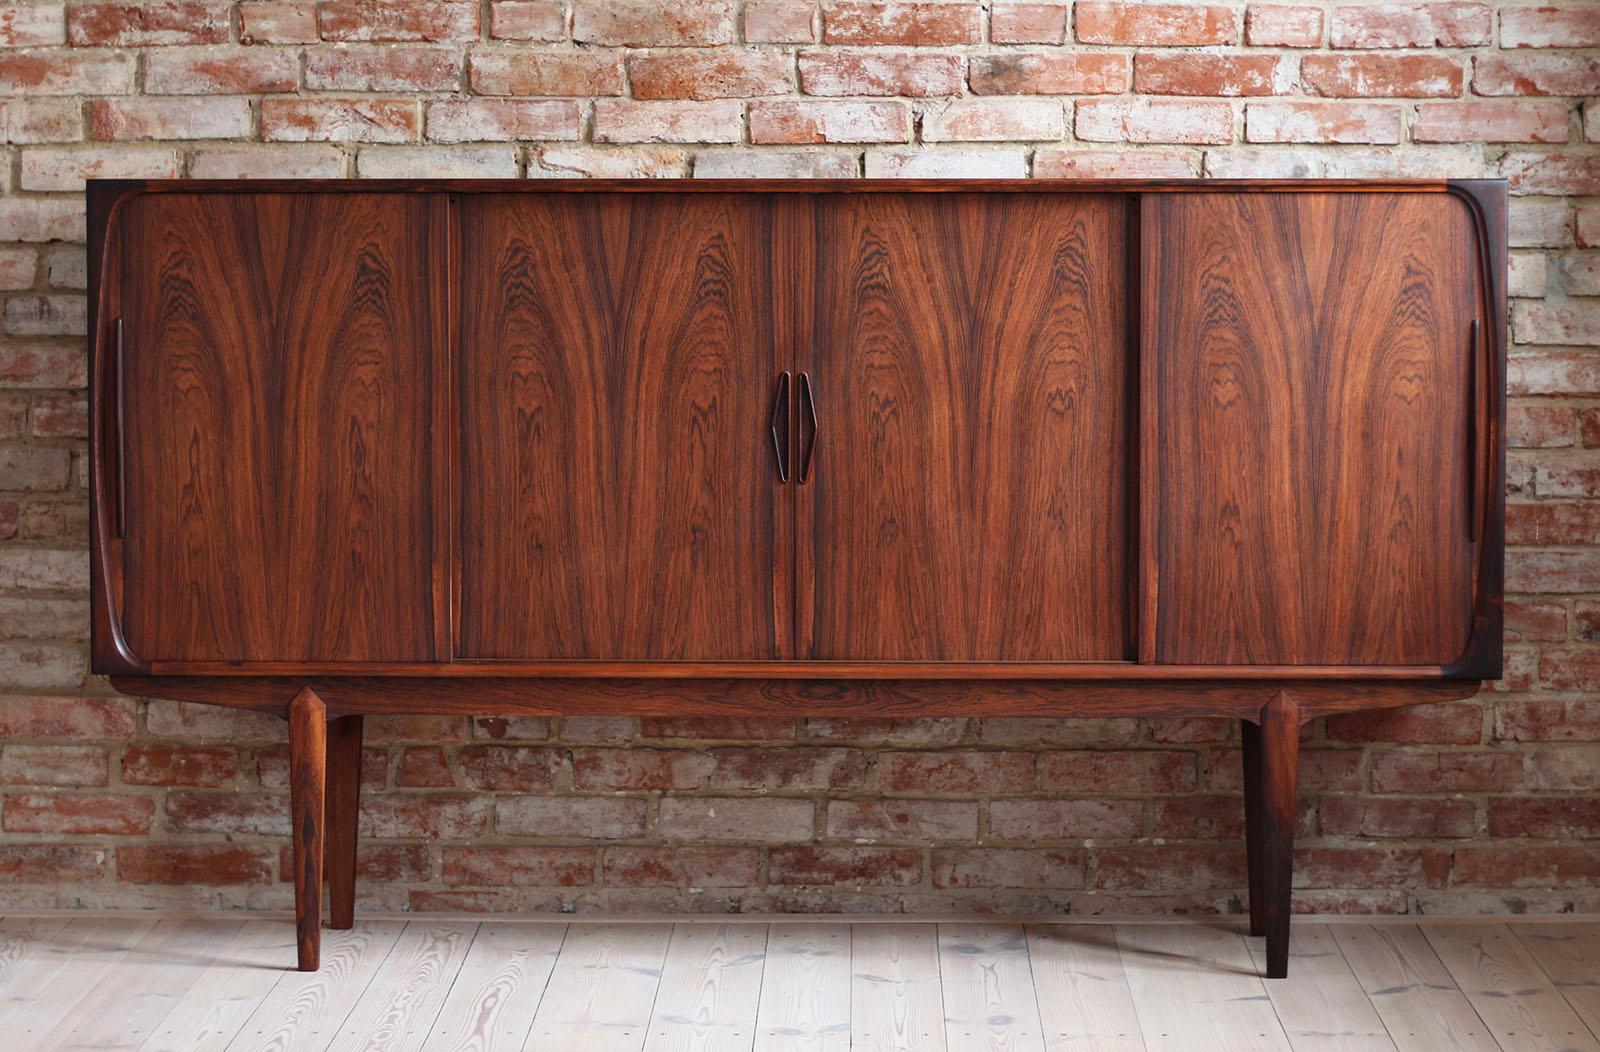 Danish Highboard in beautiful wood veneer. The piece was designed and made in 1960s and is a great example of Danish midcentury design in its best. It features four storage sections that provide lots of space and are easily accessible with sliding